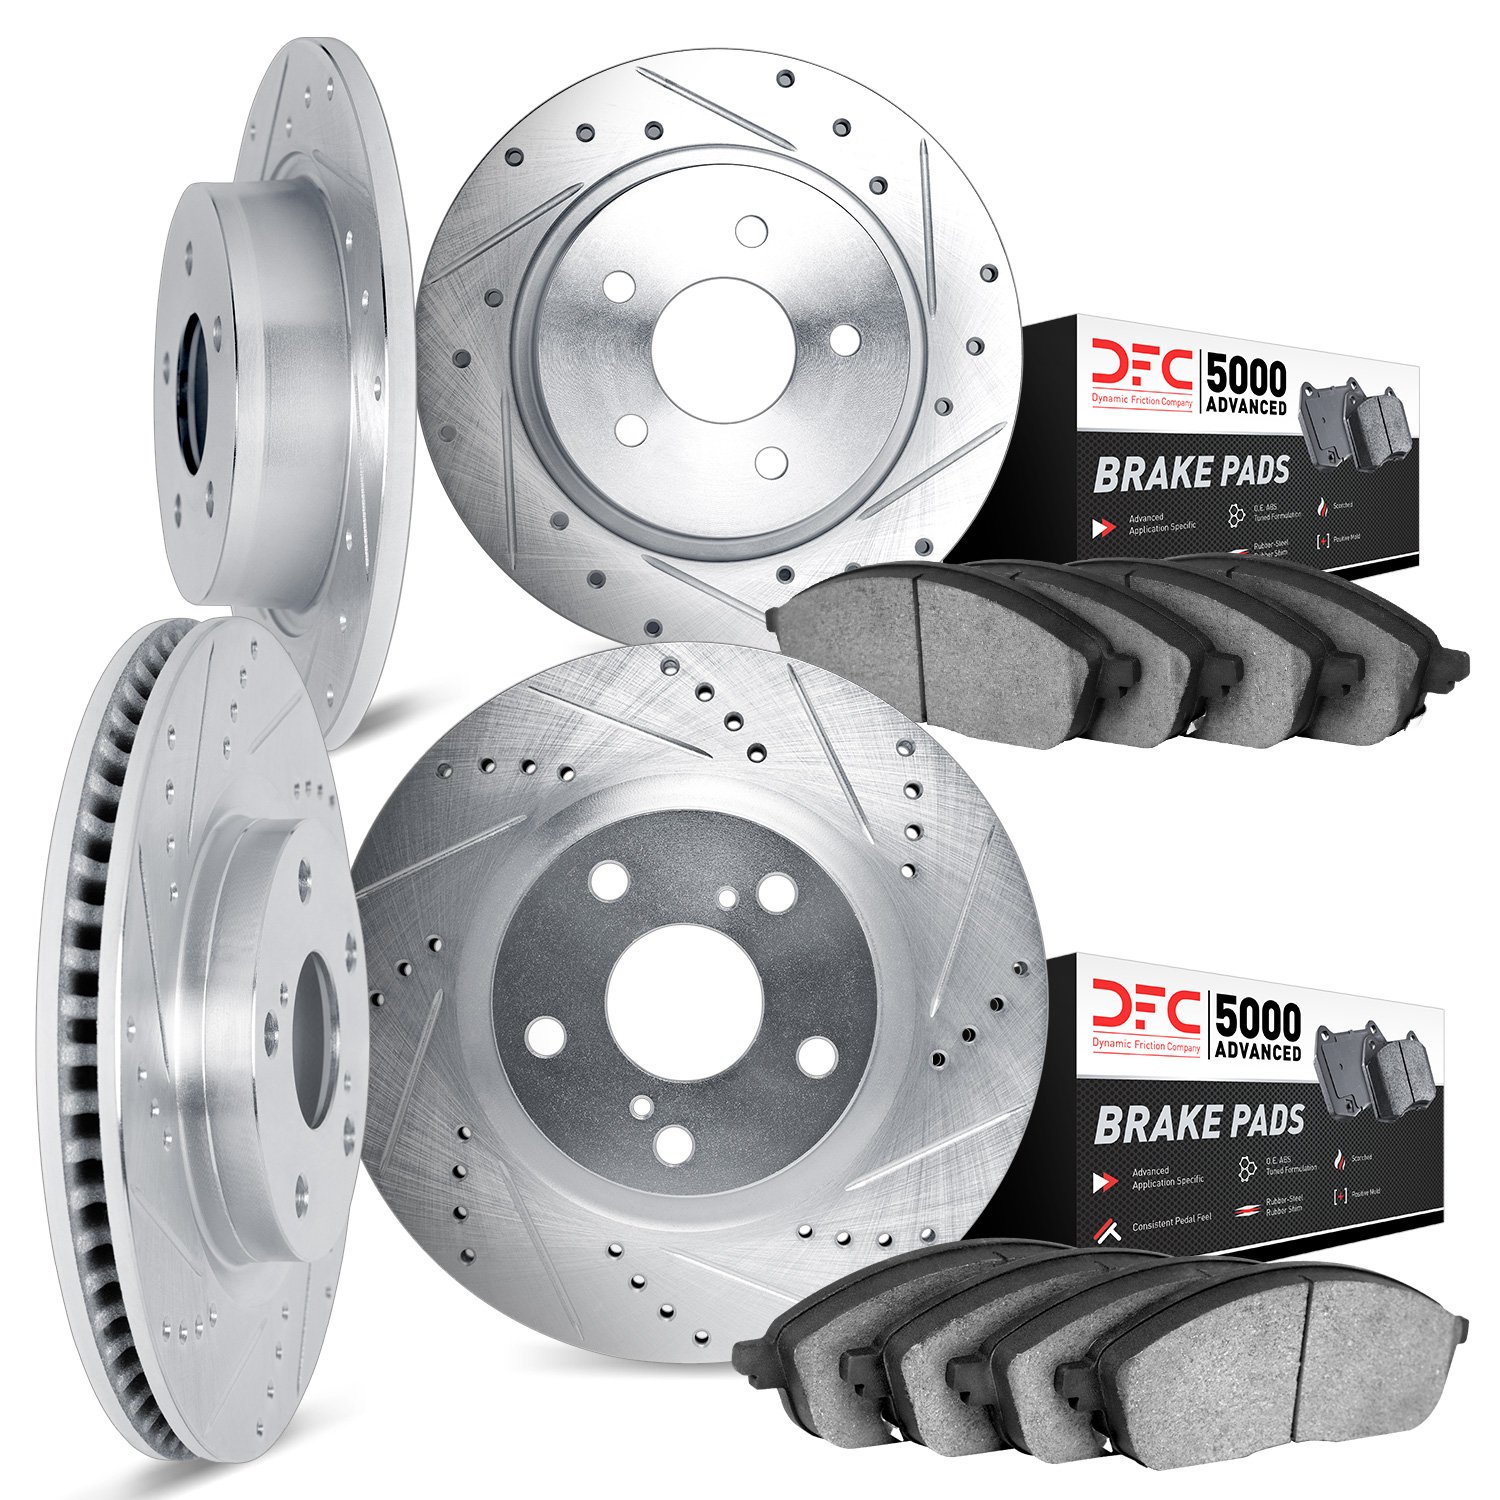 7504-42056 Drilled/Slotted Brake Rotors w/5000 Advanced Brake Pads Kit [Silver], 2014-2020 Mopar, Position: Front and Rear